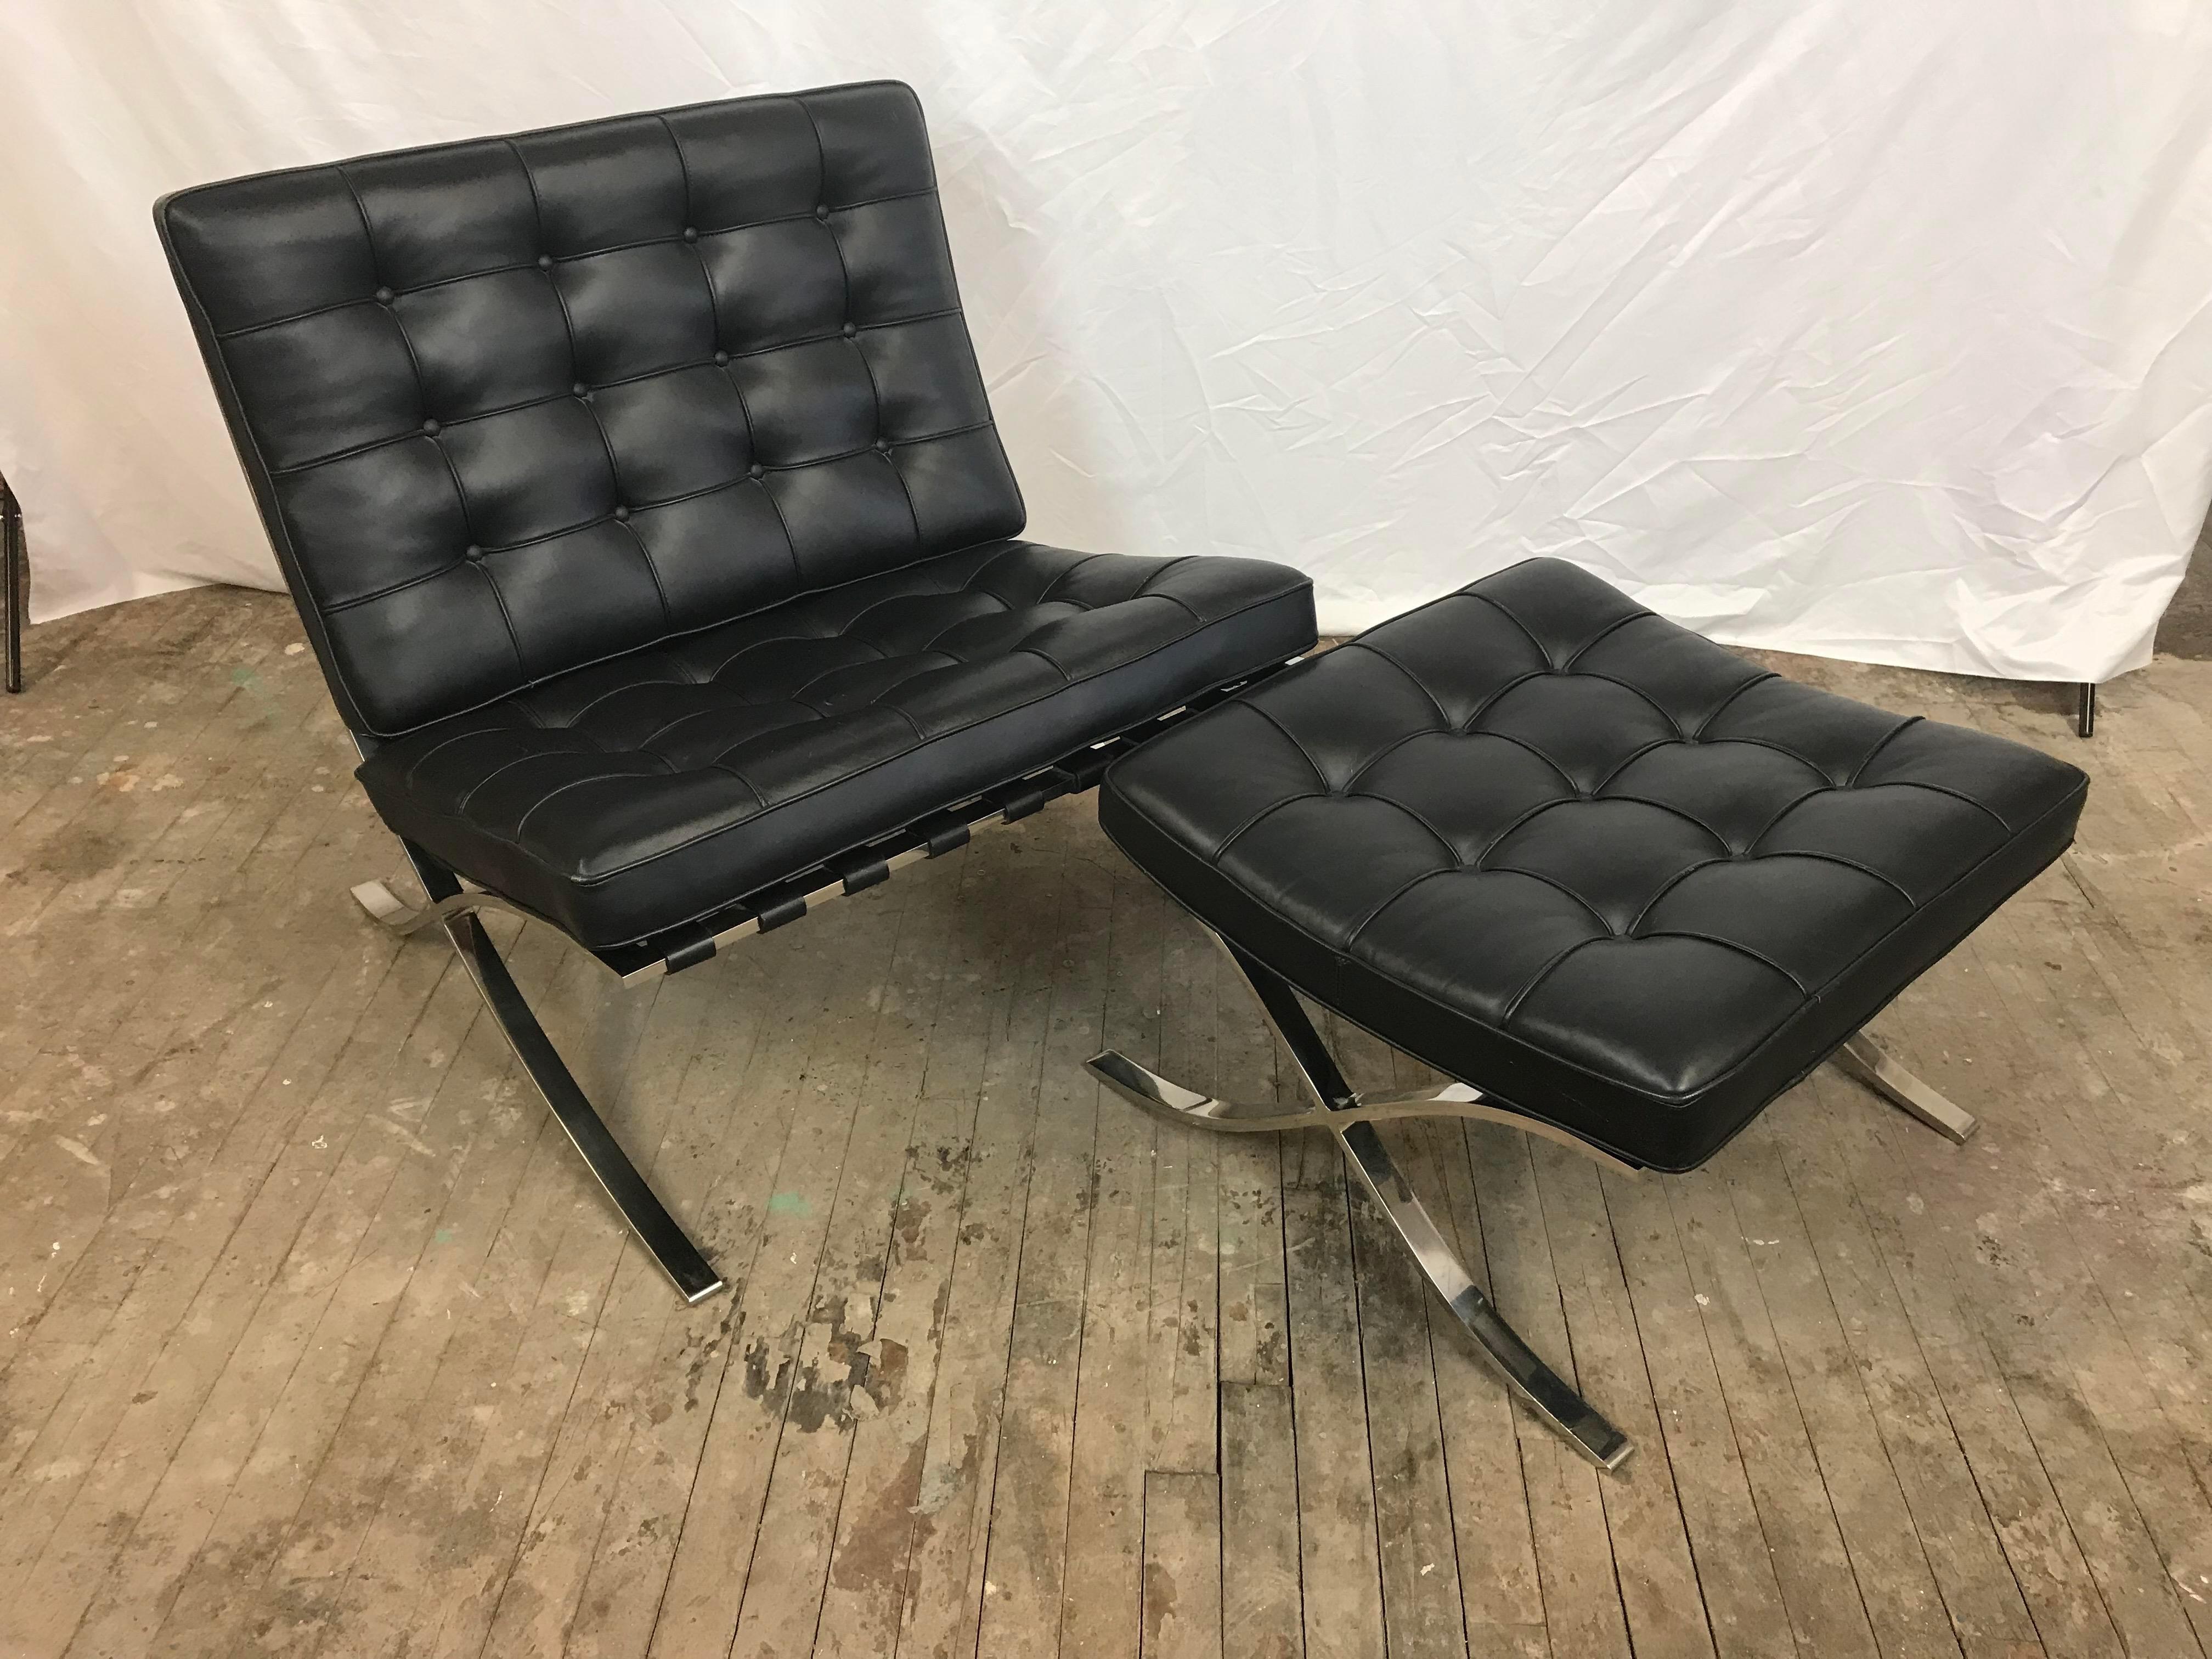 Genuine Knoll International version of Mies van der Rohe's famous Barcelona chair and ottoman stool. 

The chair measures 29 1/2 inches wide, 30 deep and 30 1/4 inches tall. The seat height is 17 inches. The stool is 25 inches wide, 23 1/4 deep